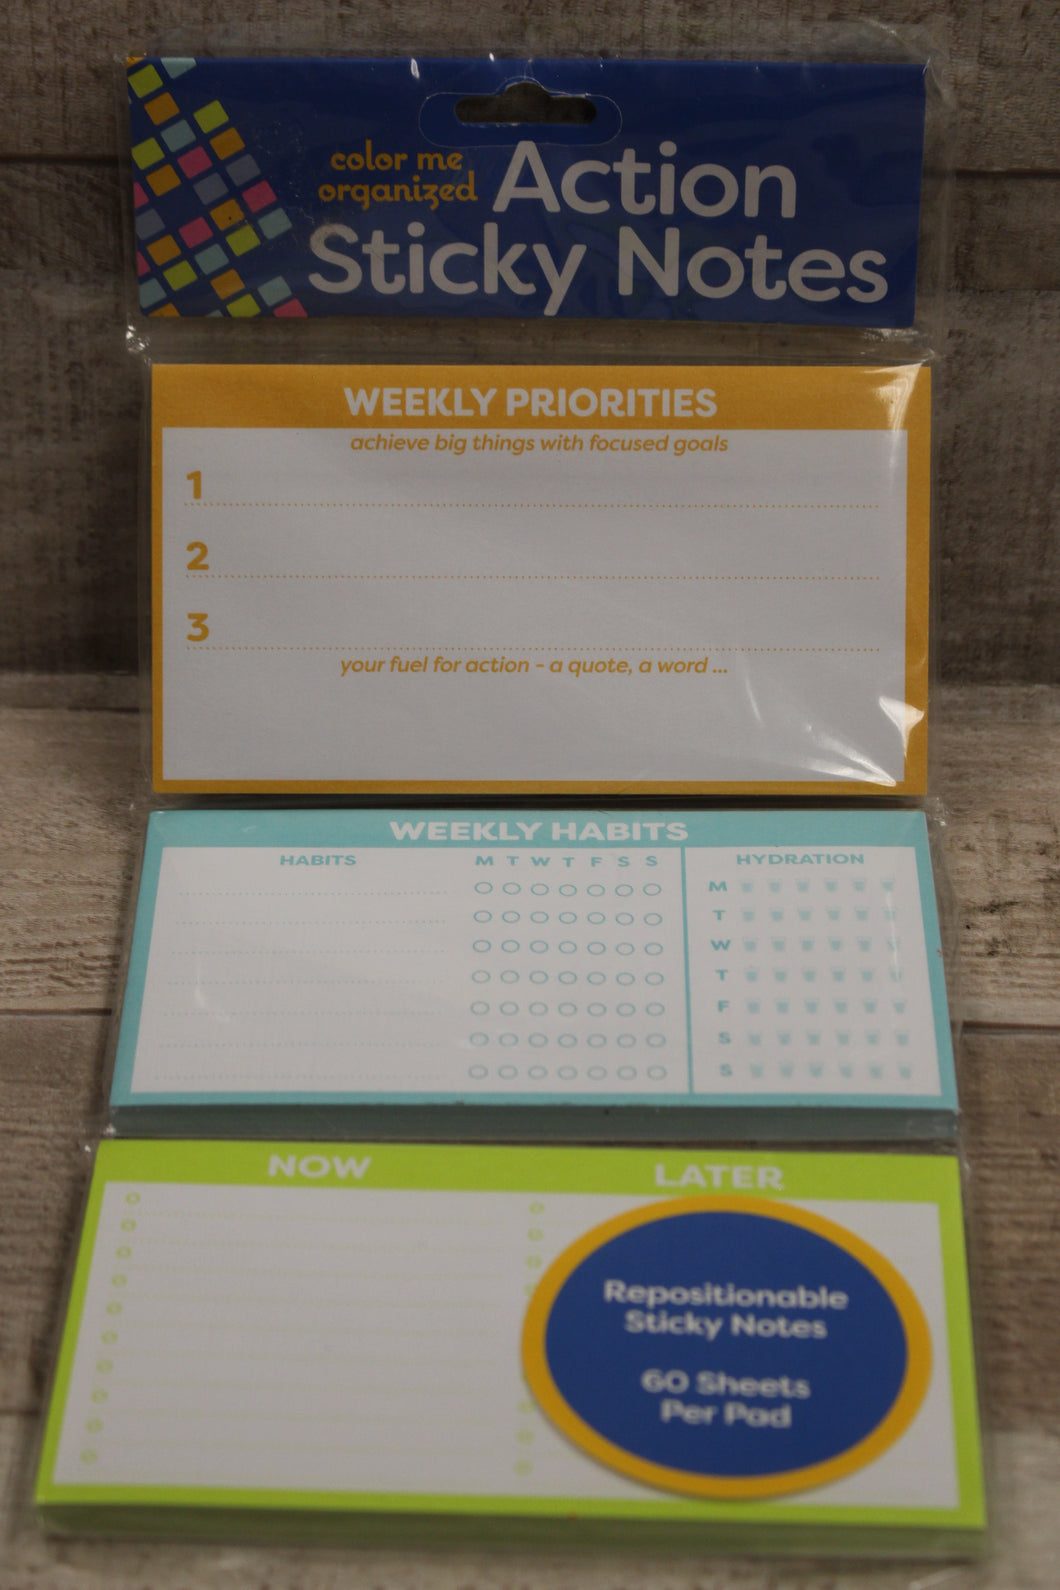 Color Me Organized Action Sticky Notes - Weekly Priorities/Habits - Repositionable - New